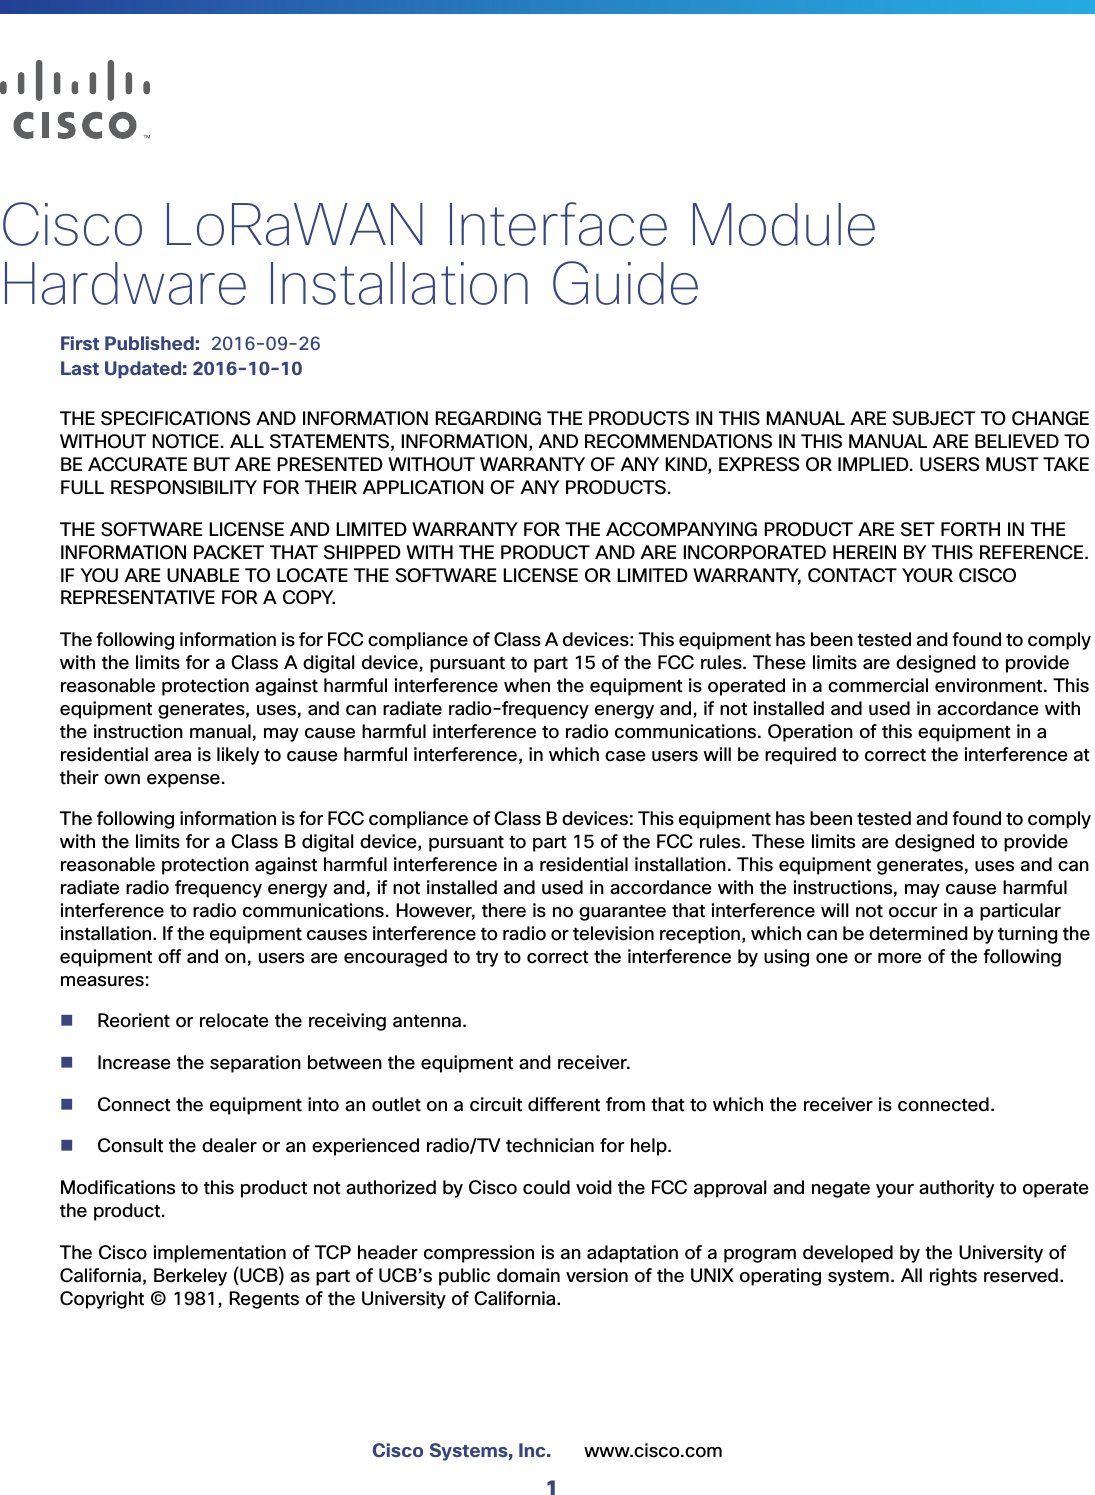 1Cisco Systems, Inc. www.cisco.com Cisco LoRaWAN Interface Module Hardware Installation GuideFirst Published:  2016-09-26Last Updated: 2016-10-10THE SPECIFICATIONS AND INFORMATION REGARDING THE PRODUCTS IN THIS MANUAL ARE SUBJECT TO CHANGE WITHOUT NOTICE. ALL STATEMENTS, INFORMATION, AND RECOMMENDATIONS IN THIS MANUAL ARE BELIEVED TO BE ACCURATE BUT ARE PRESENTED WITHOUT WARRANTY OF ANY KIND, EXPRESS OR IMPLIED. USERS MUST TAKE FULL RESPONSIBILITY FOR THEIR APPLICATION OF ANY PRODUCTS.THE SOFTWARE LICENSE AND LIMITED WARRANTY FOR THE ACCOMPANYING PRODUCT ARE SET FORTH IN THE INFORMATION PACKET THAT SHIPPED WITH THE PRODUCT AND ARE INCORPORATED HEREIN BY THIS REFERENCE. IF YOU ARE UNABLE TO LOCATE THE SOFTWARE LICENSE OR LIMITED WARRANTY, CONTACT YOUR CISCO REPRESENTATIVE FOR A COPY.The following information is for FCC compliance of Class A devices: This equipment has been tested and found to comply with the limits for a Class A digital device, pursuant to part 15 of the FCC rules. These limits are designed to provide reasonable protection against harmful interference when the equipment is operated in a commercial environment. This equipment generates, uses, and can radiate radio-frequency energy and, if not installed and used in accordance with the instruction manual, may cause harmful interference to radio communications. Operation of this equipment in a residential area is likely to cause harmful interference, in which case users will be required to correct the interference at their own expense. The following information is for FCC compliance of Class B devices: This equipment has been tested and found to comply with the limits for a Class B digital device, pursuant to part 15 of the FCC rules. These limits are designed to provide reasonable protection against harmful interference in a residential installation. This equipment generates, uses and can radiate radio frequency energy and, if not installed and used in accordance with the instructions, may cause harmful interference to radio communications. However, there is no guarantee that interference will not occur in a particular installation. If the equipment causes interference to radio or television reception, which can be determined by turning the equipment off and on, users are encouraged to try to correct the interference by using one or more of the following measures:Reorient or relocate the receiving antenna.Increase the separation between the equipment and receiver.Connect the equipment into an outlet on a circuit different from that to which the receiver is connected.Consult the dealer or an experienced radio/TV technician for help. Modifications to this product not authorized by Cisco could void the FCC approval and negate your authority to operate the product. The Cisco implementation of TCP header compression is an adaptation of a program developed by the University of California, Berkeley (UCB) as part of UCB’s public domain version of the UNIX operating system. All rights reserved. Copyright © 1981, Regents of the University of California. 